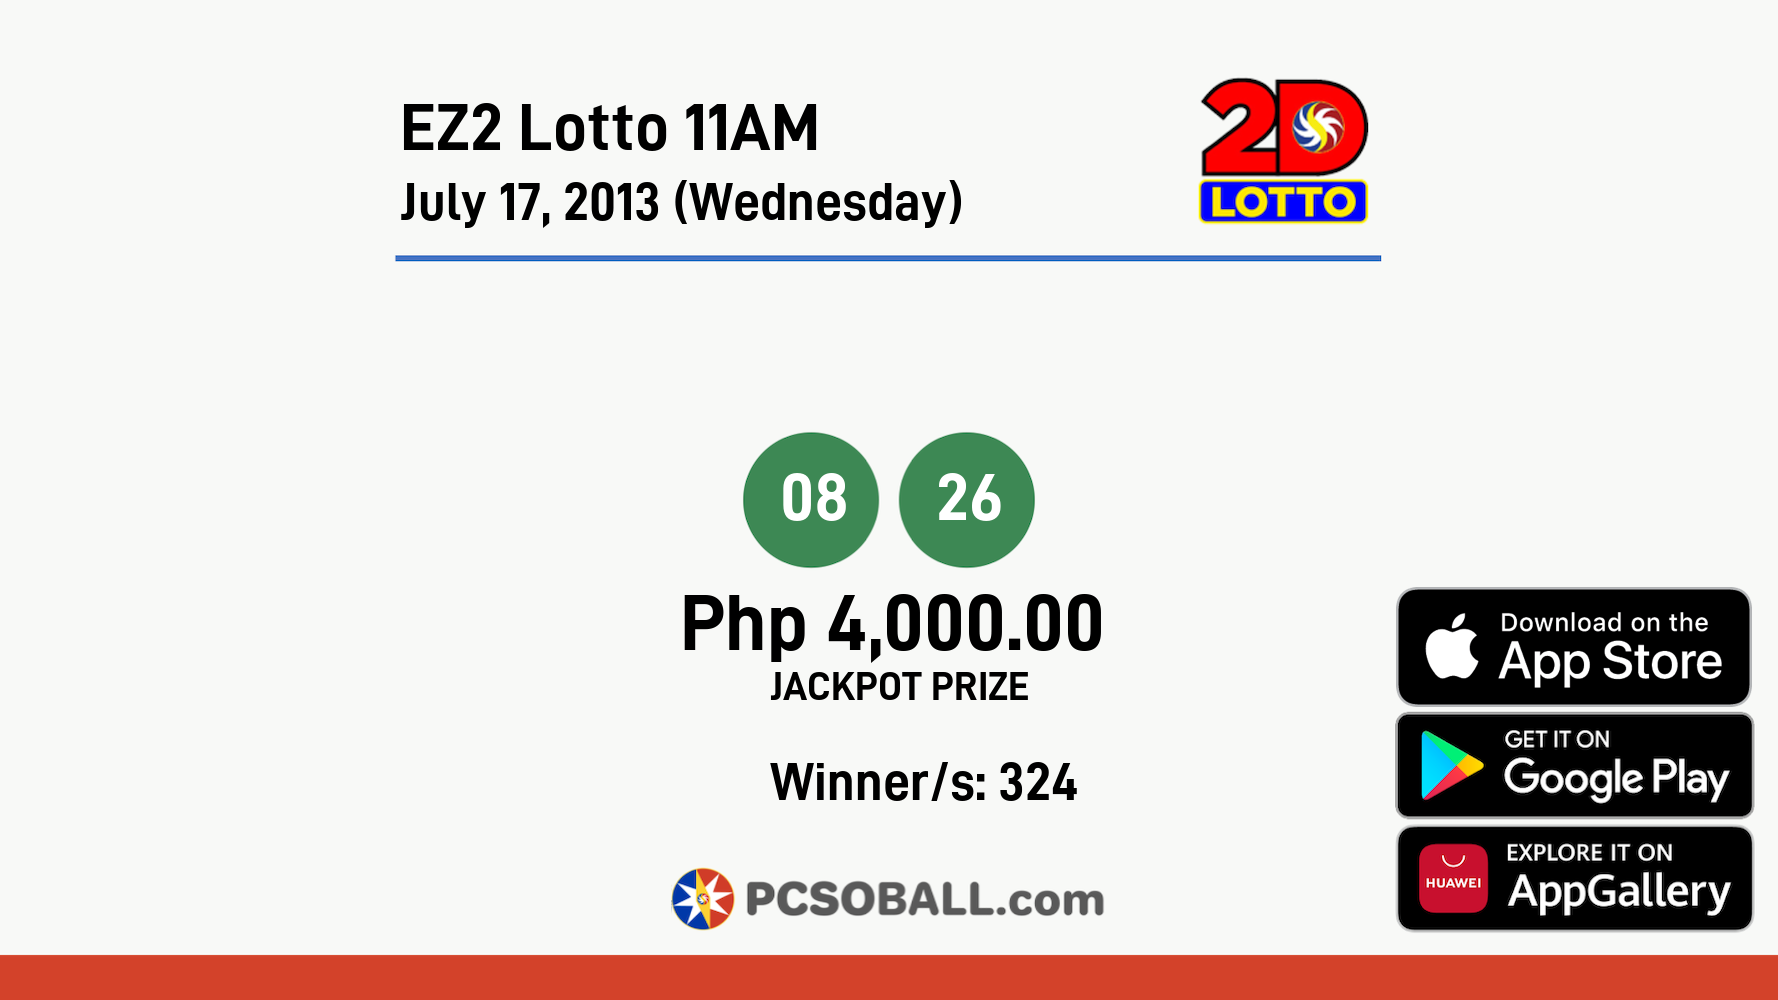 EZ2 Lotto 11AM July 17, 2013 (Wednesday) Result